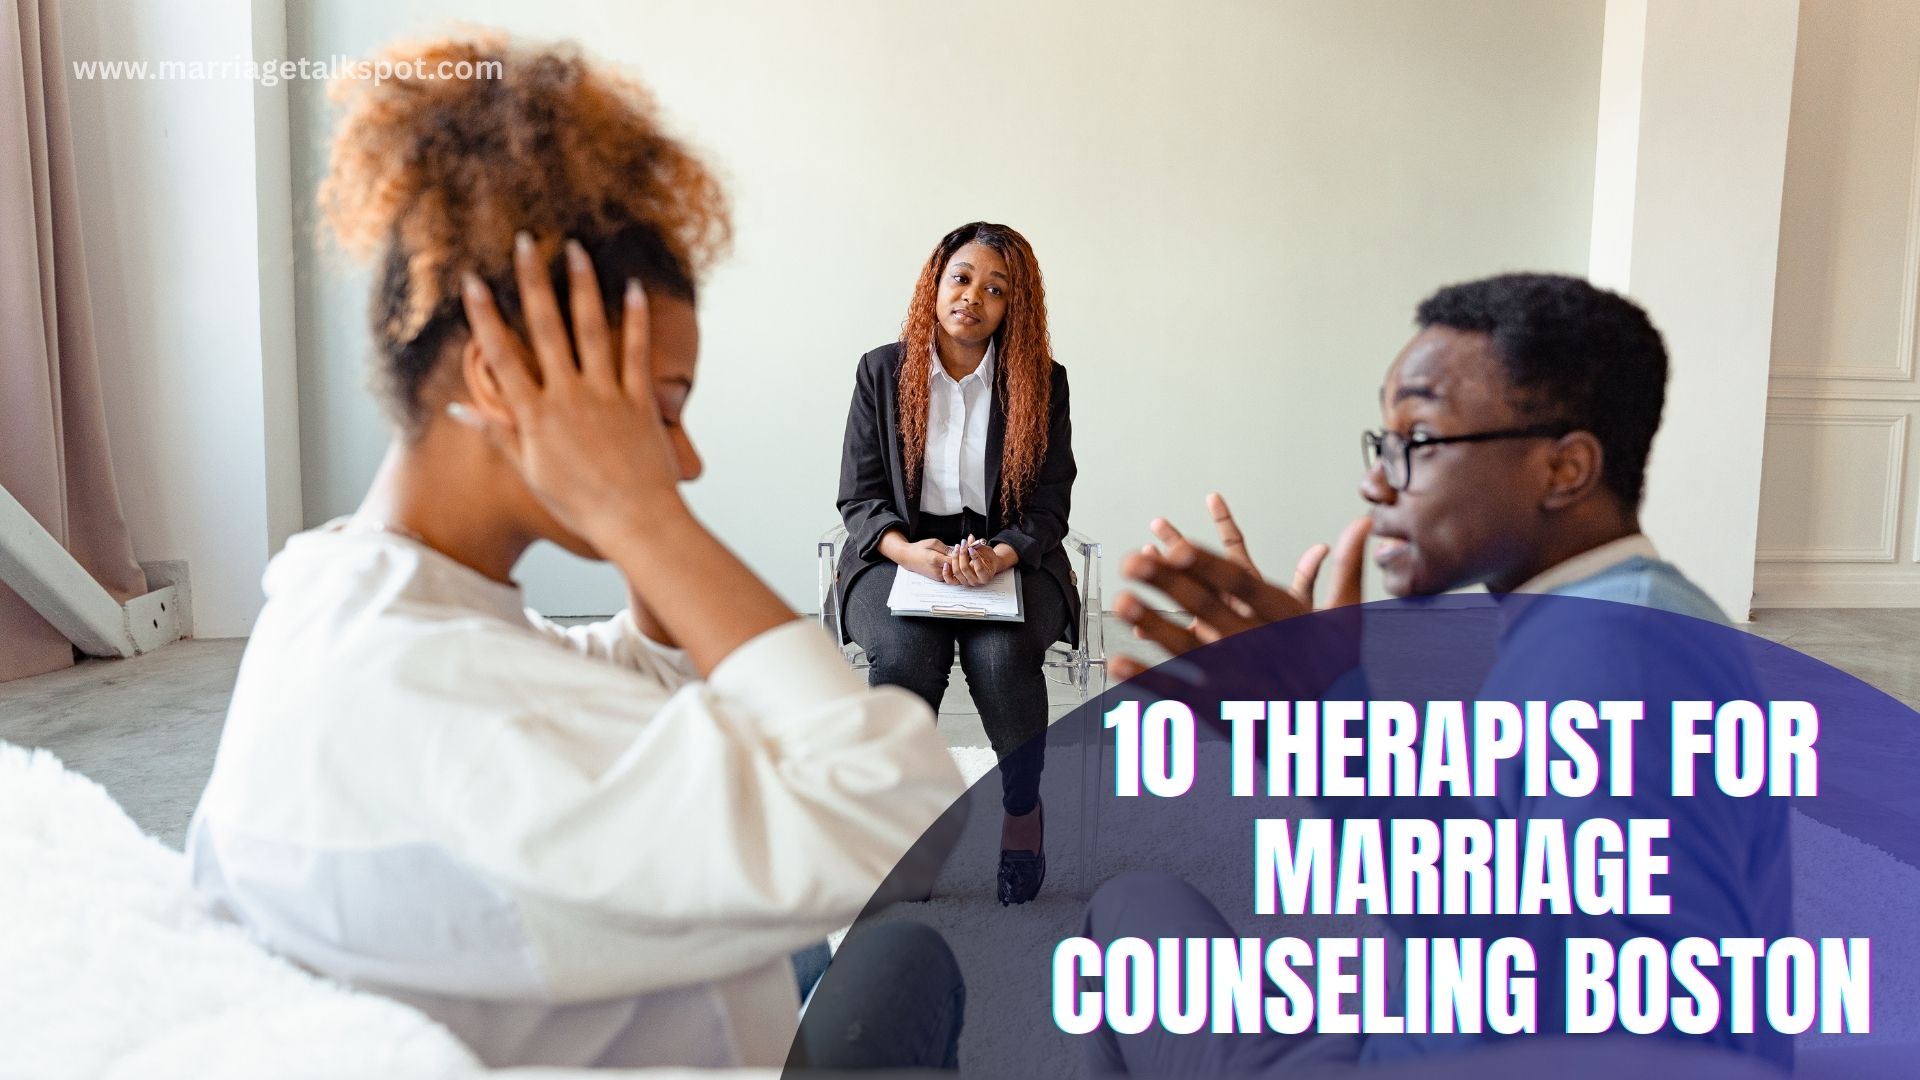 10 Therapist For Marriage Counseling Boston